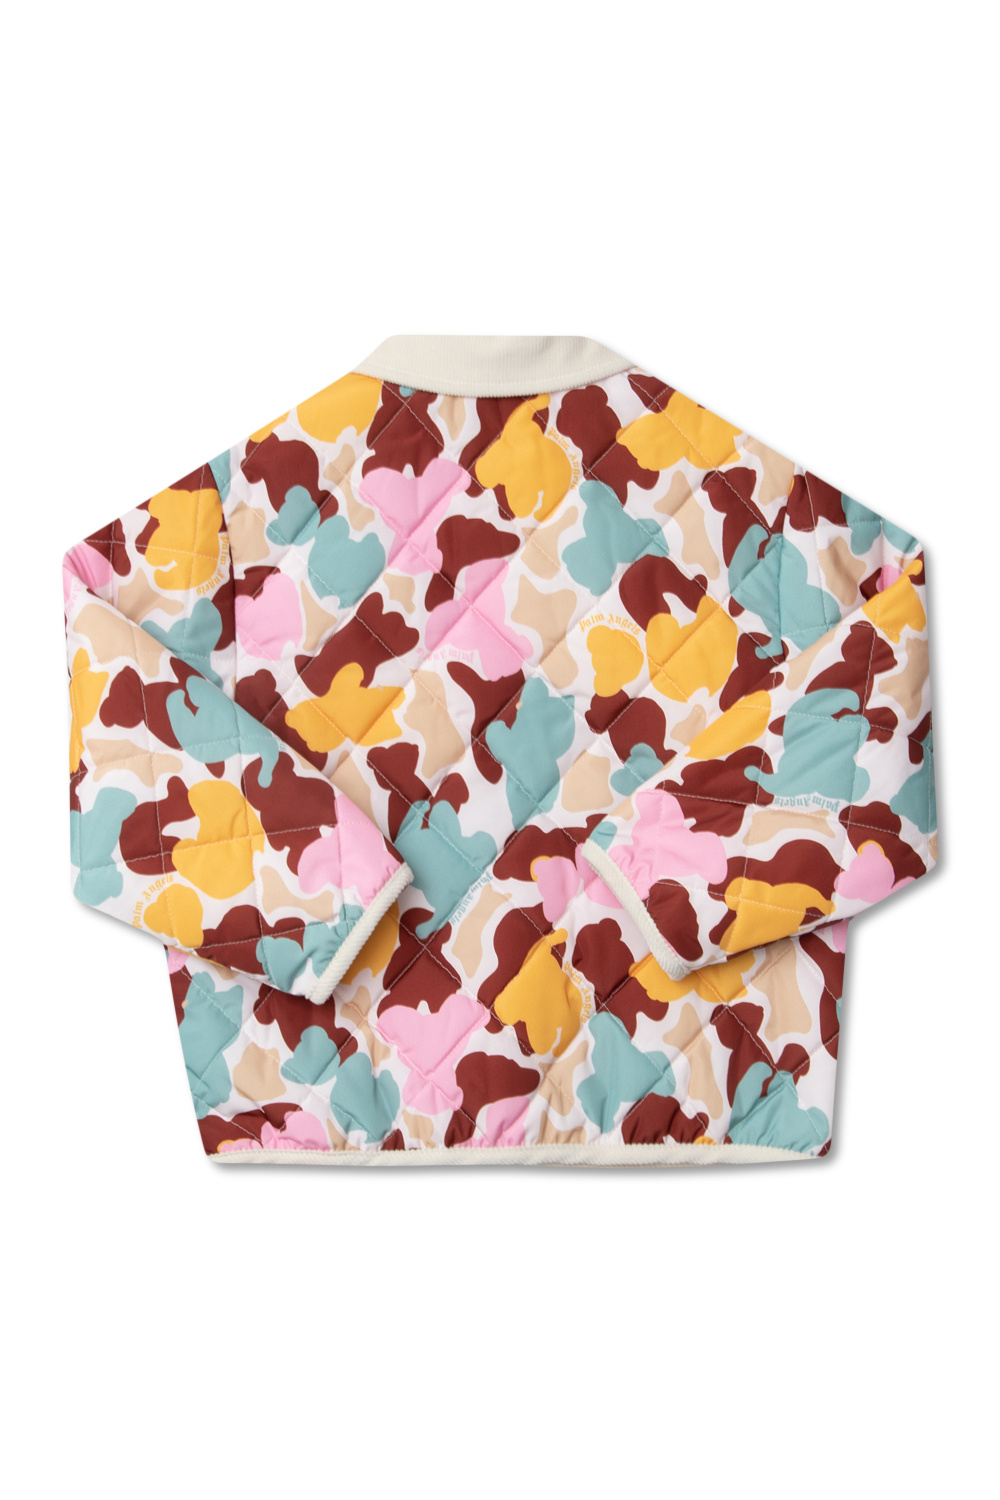 Palm Angels Kids Quilted County jacket